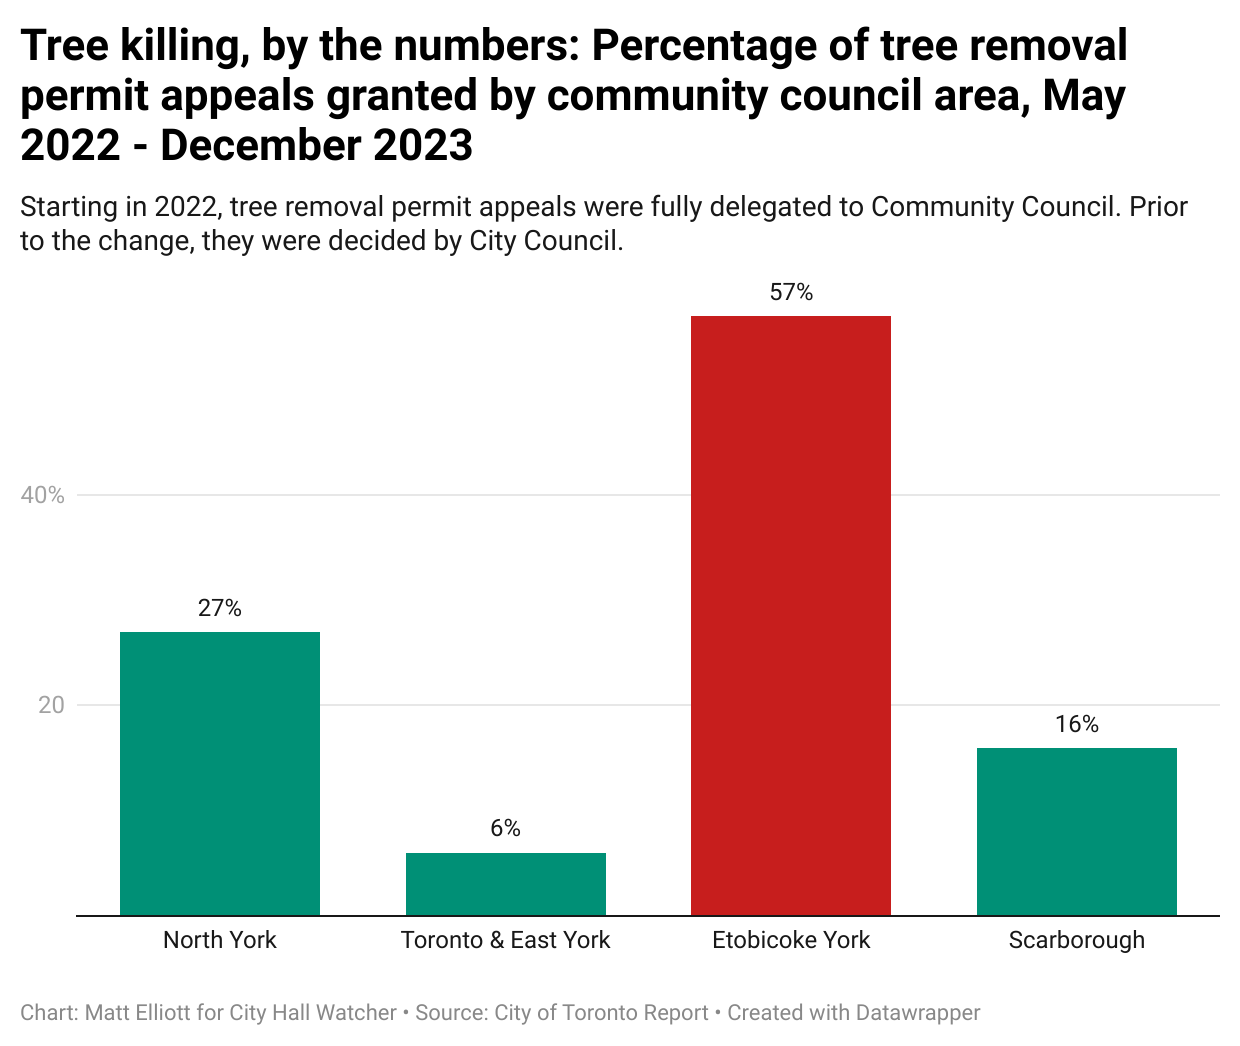 Column chart showing rate at which tree permit appeals are granted by community council area. Etobicoke York is highest by far, at 57%